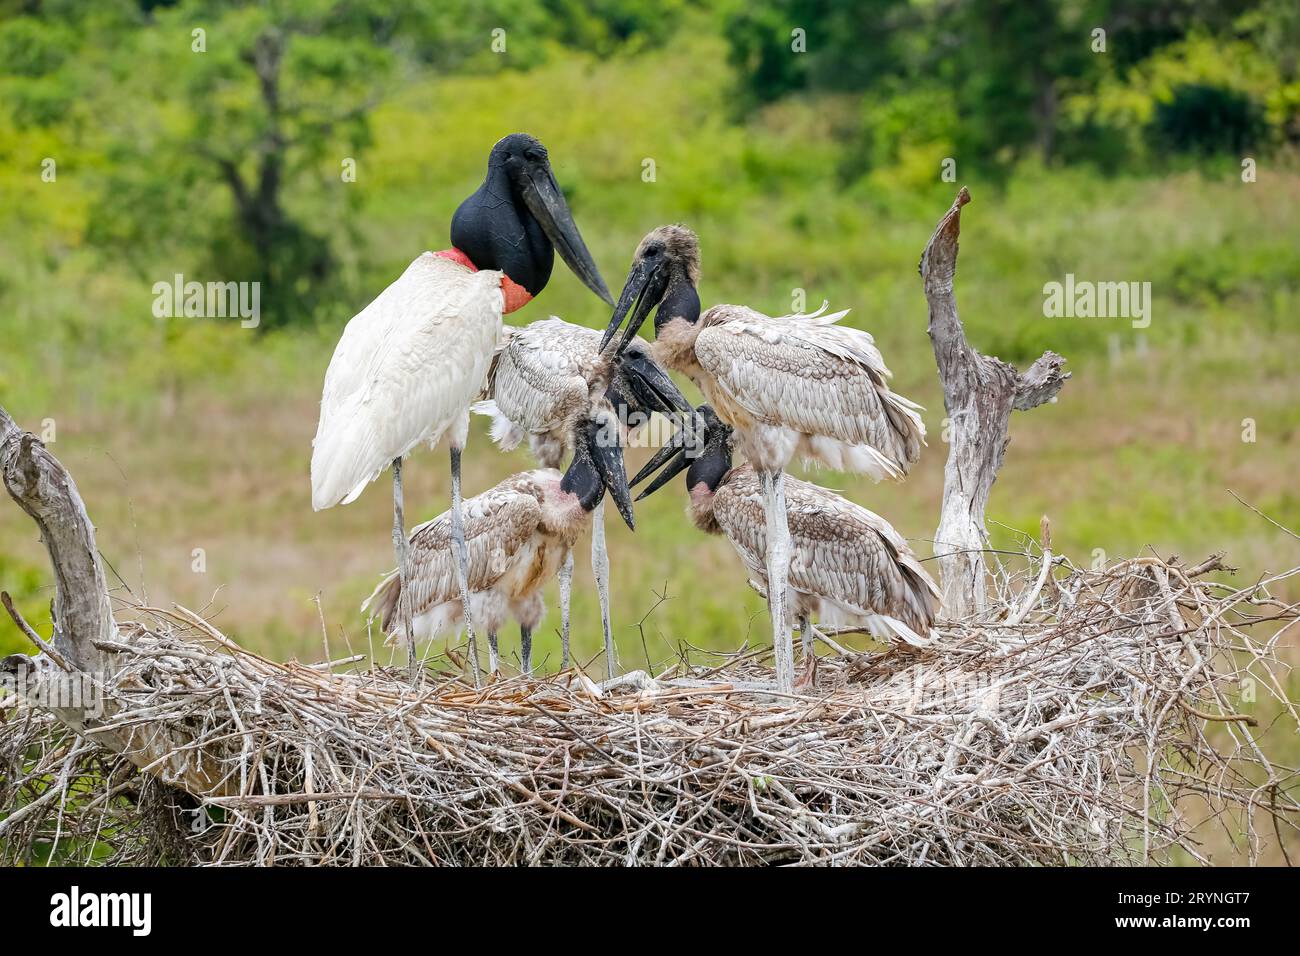 Close-up of a high Jabiru nest with four juvenile Jabirus waiting for feeding by an adult, against g Stock Photo